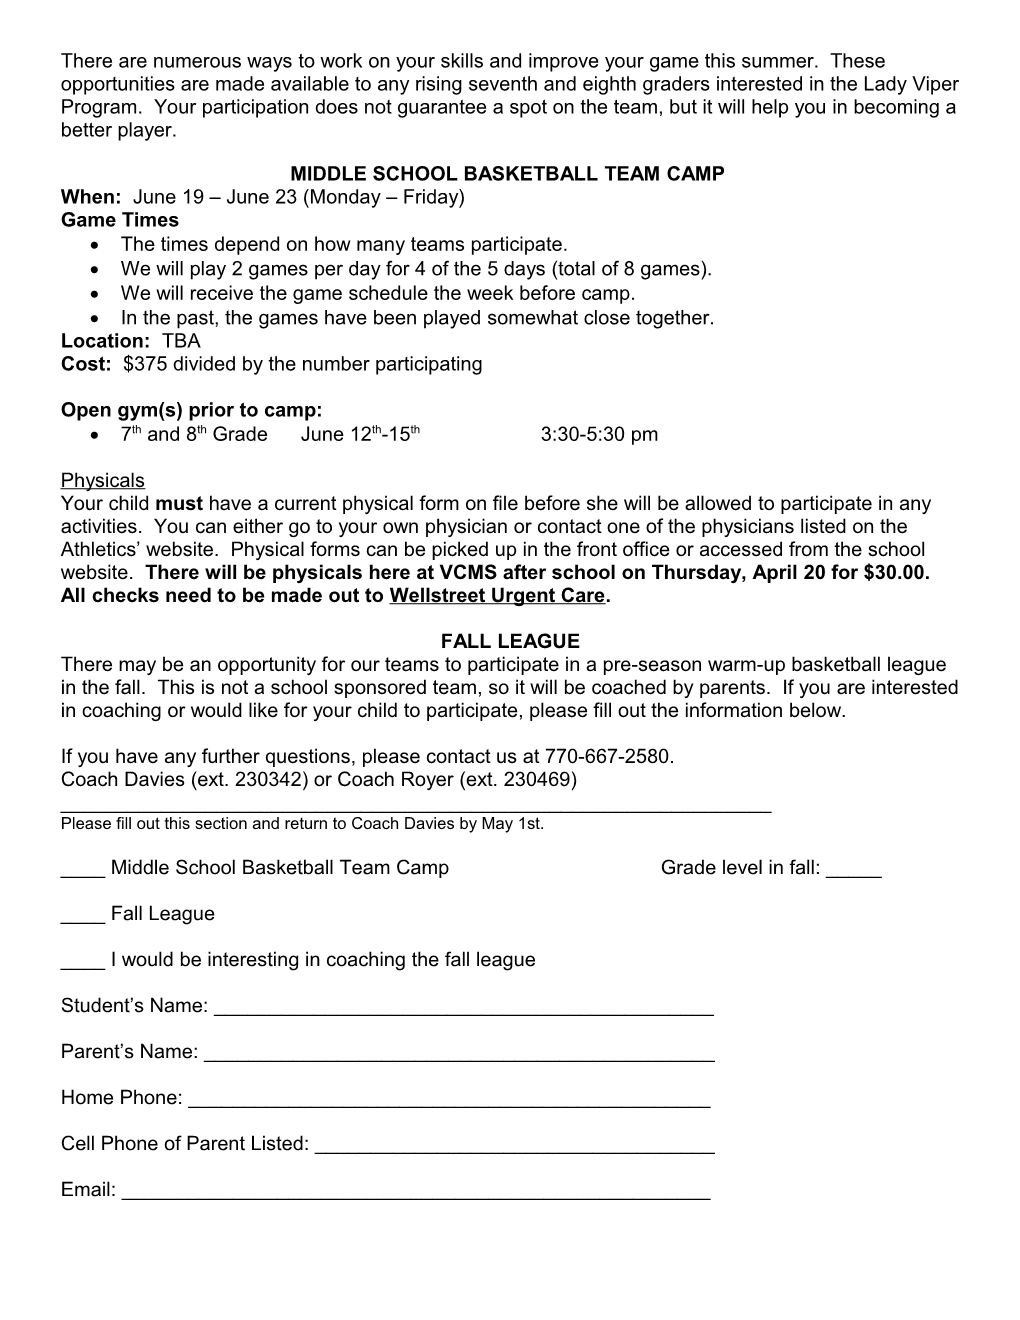 MIDDLE SCHOOL BASKETBALL TEAM CAMP at SFHS